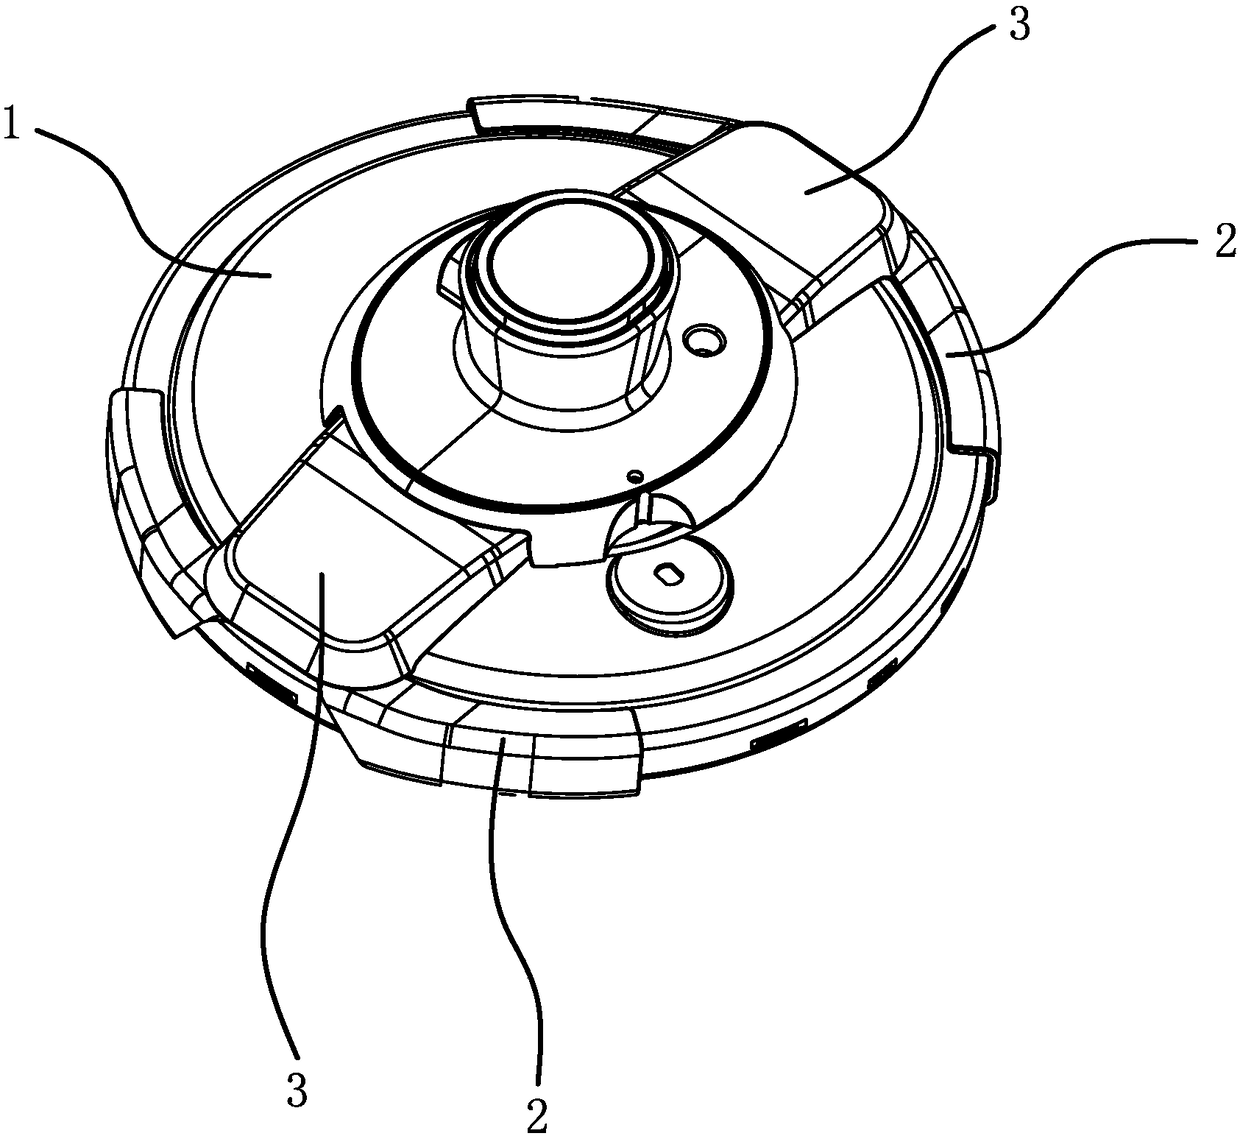 Cover safety structure of a pressure cooker lid